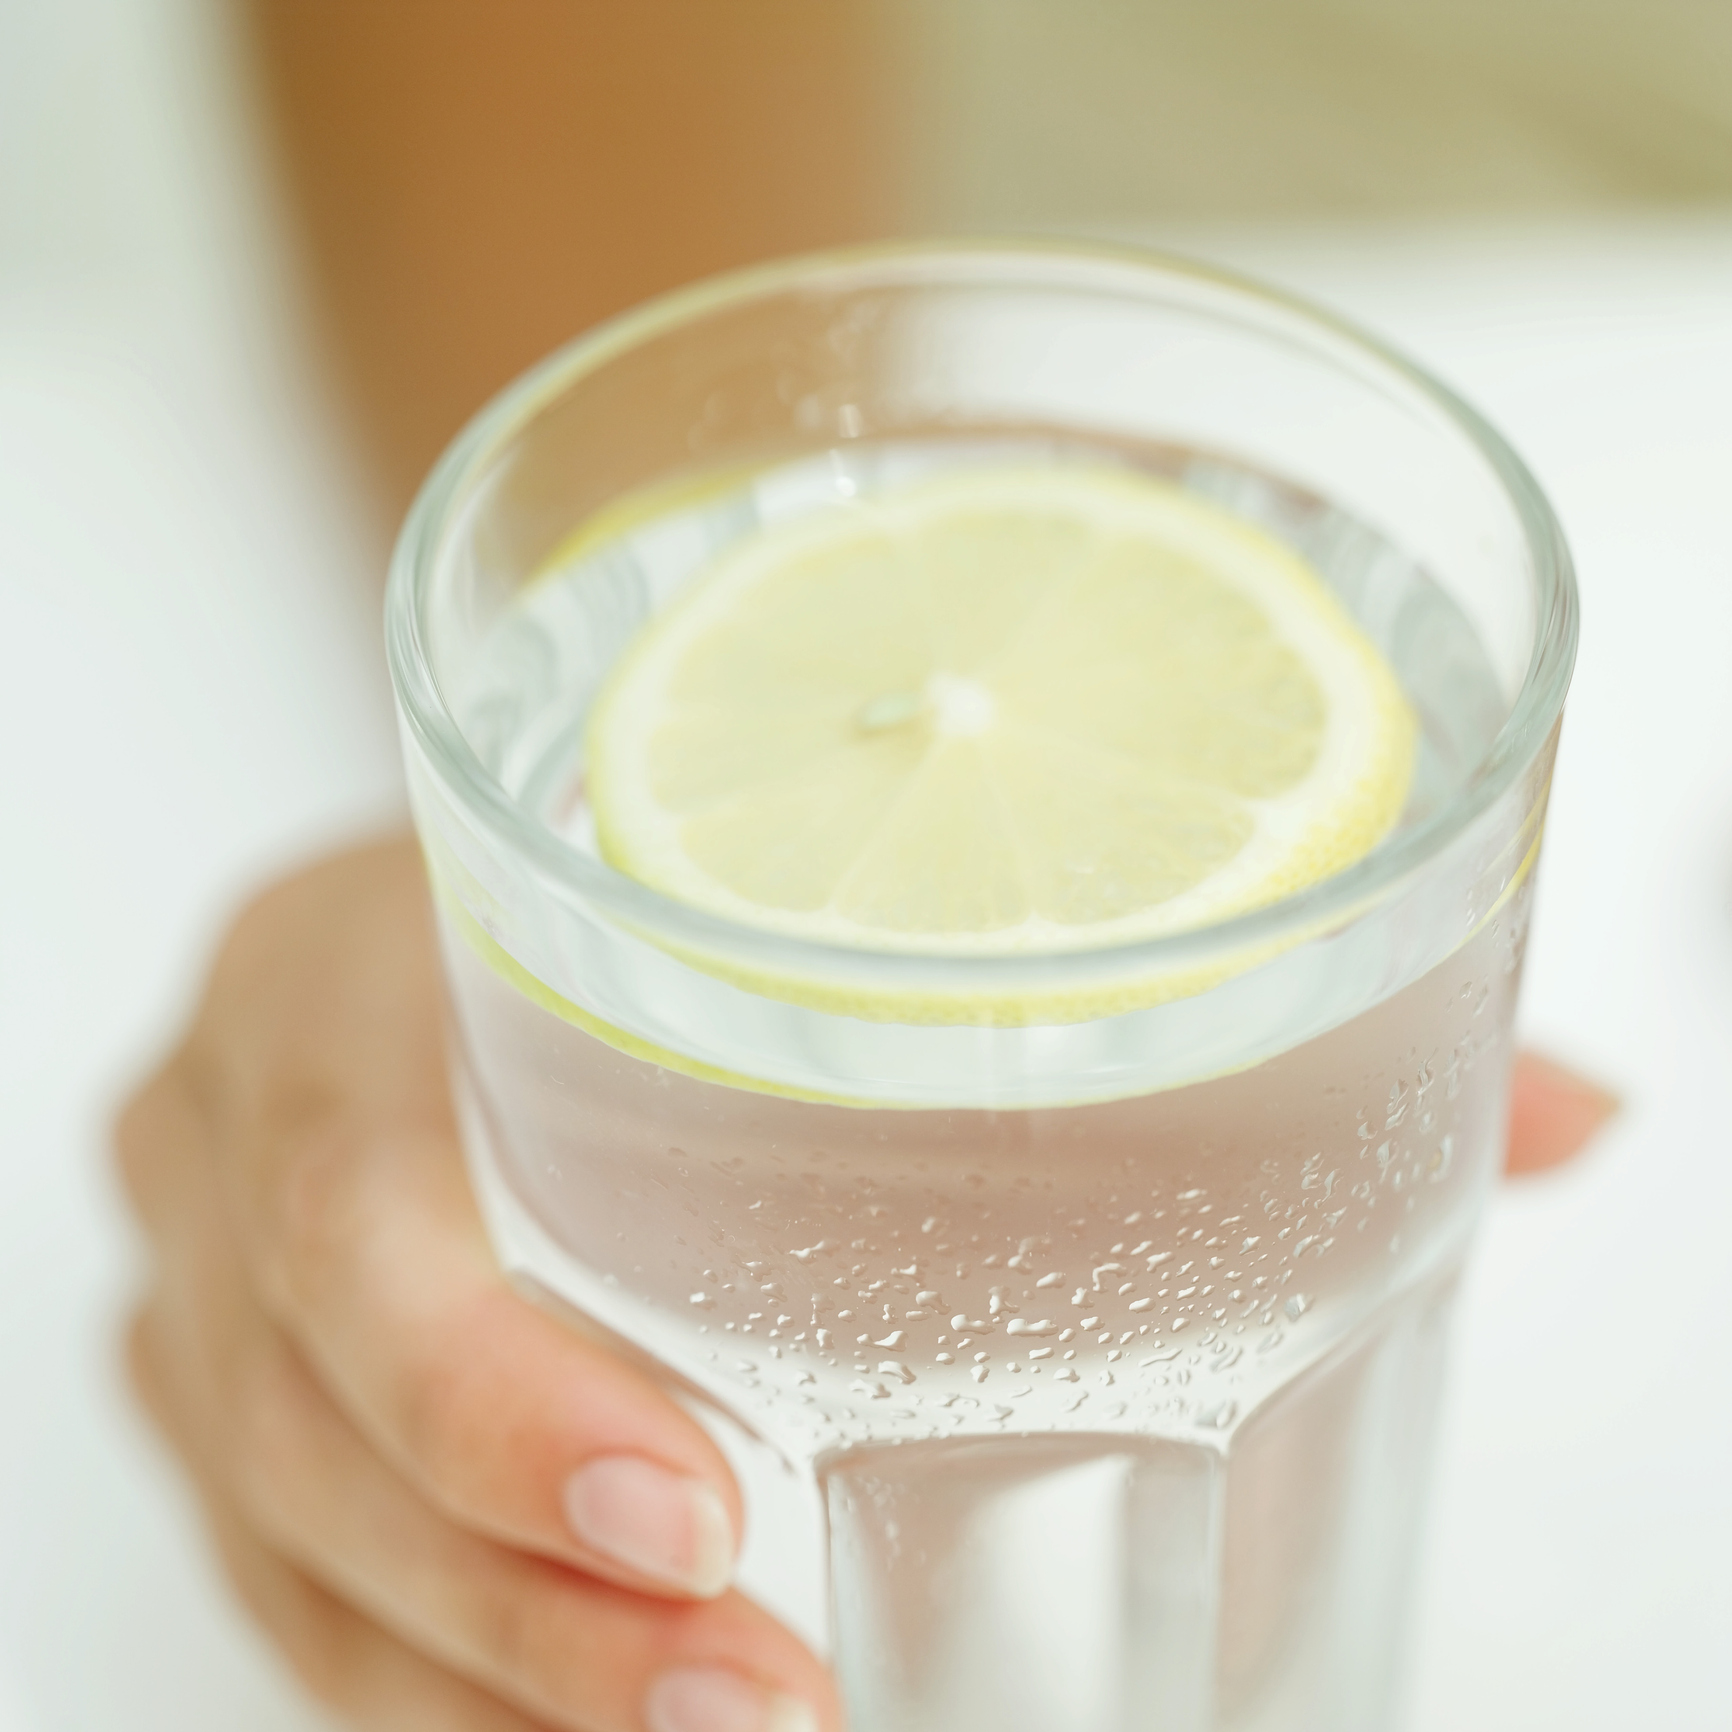 close-up-of-a-woman-s-hand-holding-a-glass-of-water-with-a-lemon-wedgejpg